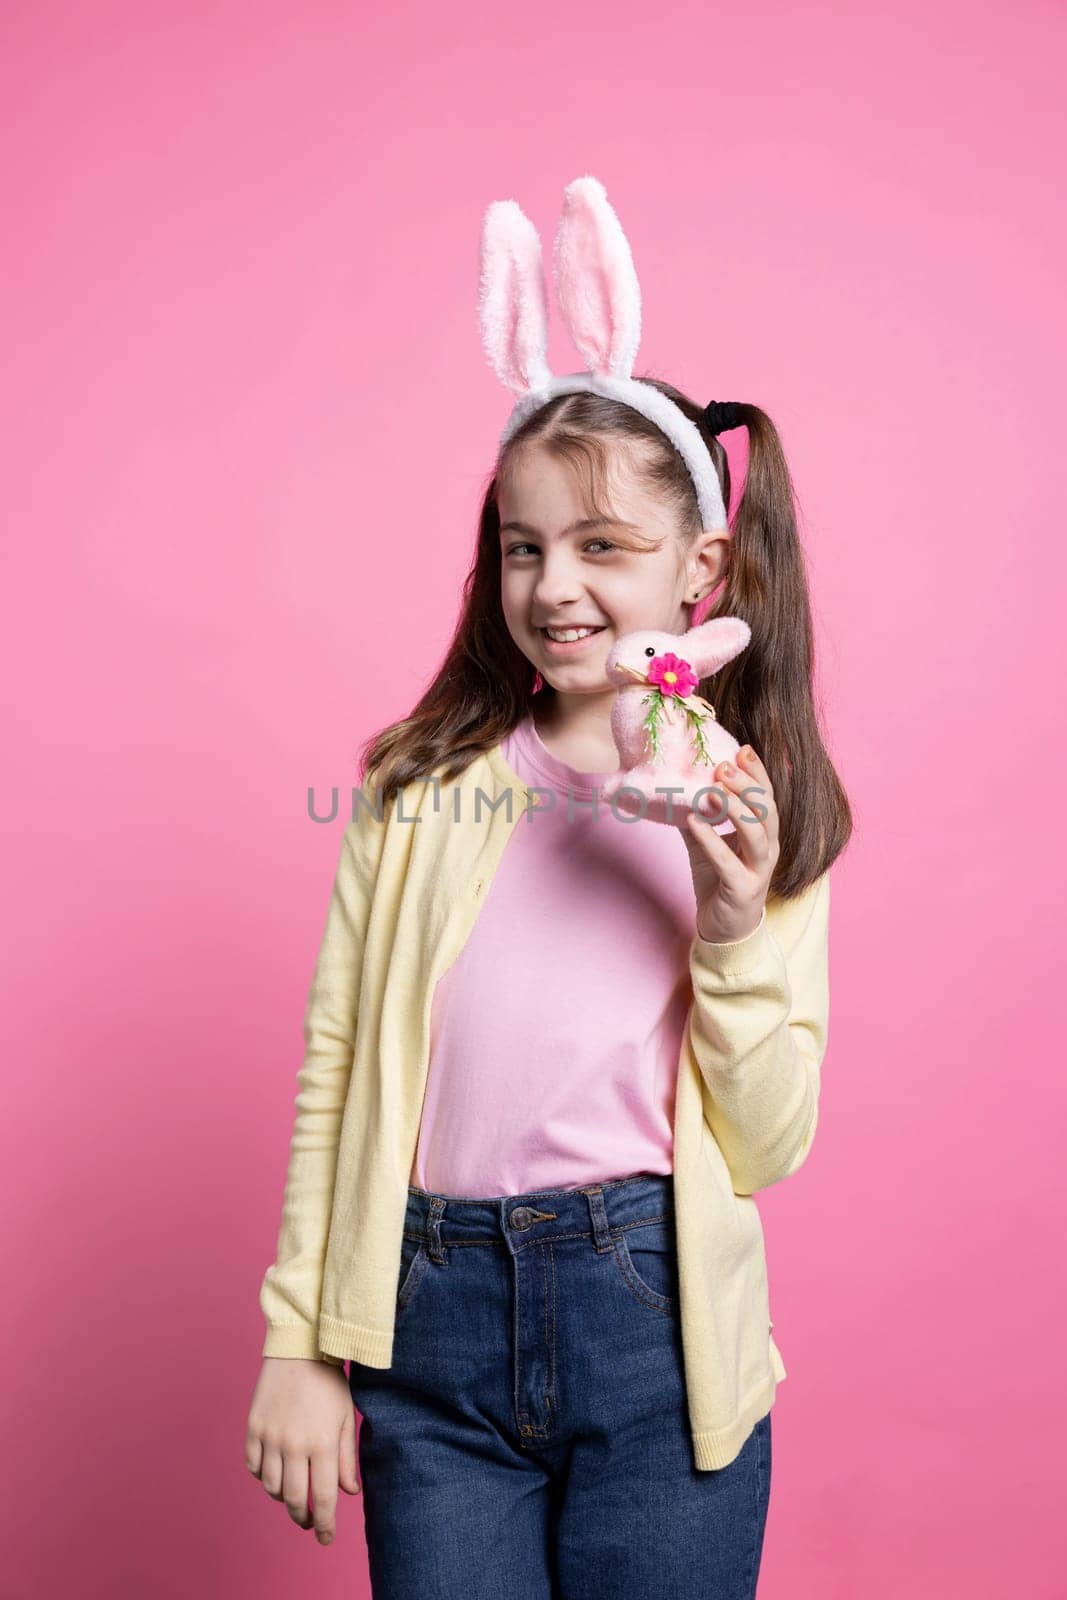 Adorable small kid holding a fluffy pink rabbit toy on camera, presenting her easter colorful toys and ornaments. Young happy child with bunny ears feeling joyful and excited about festivity.